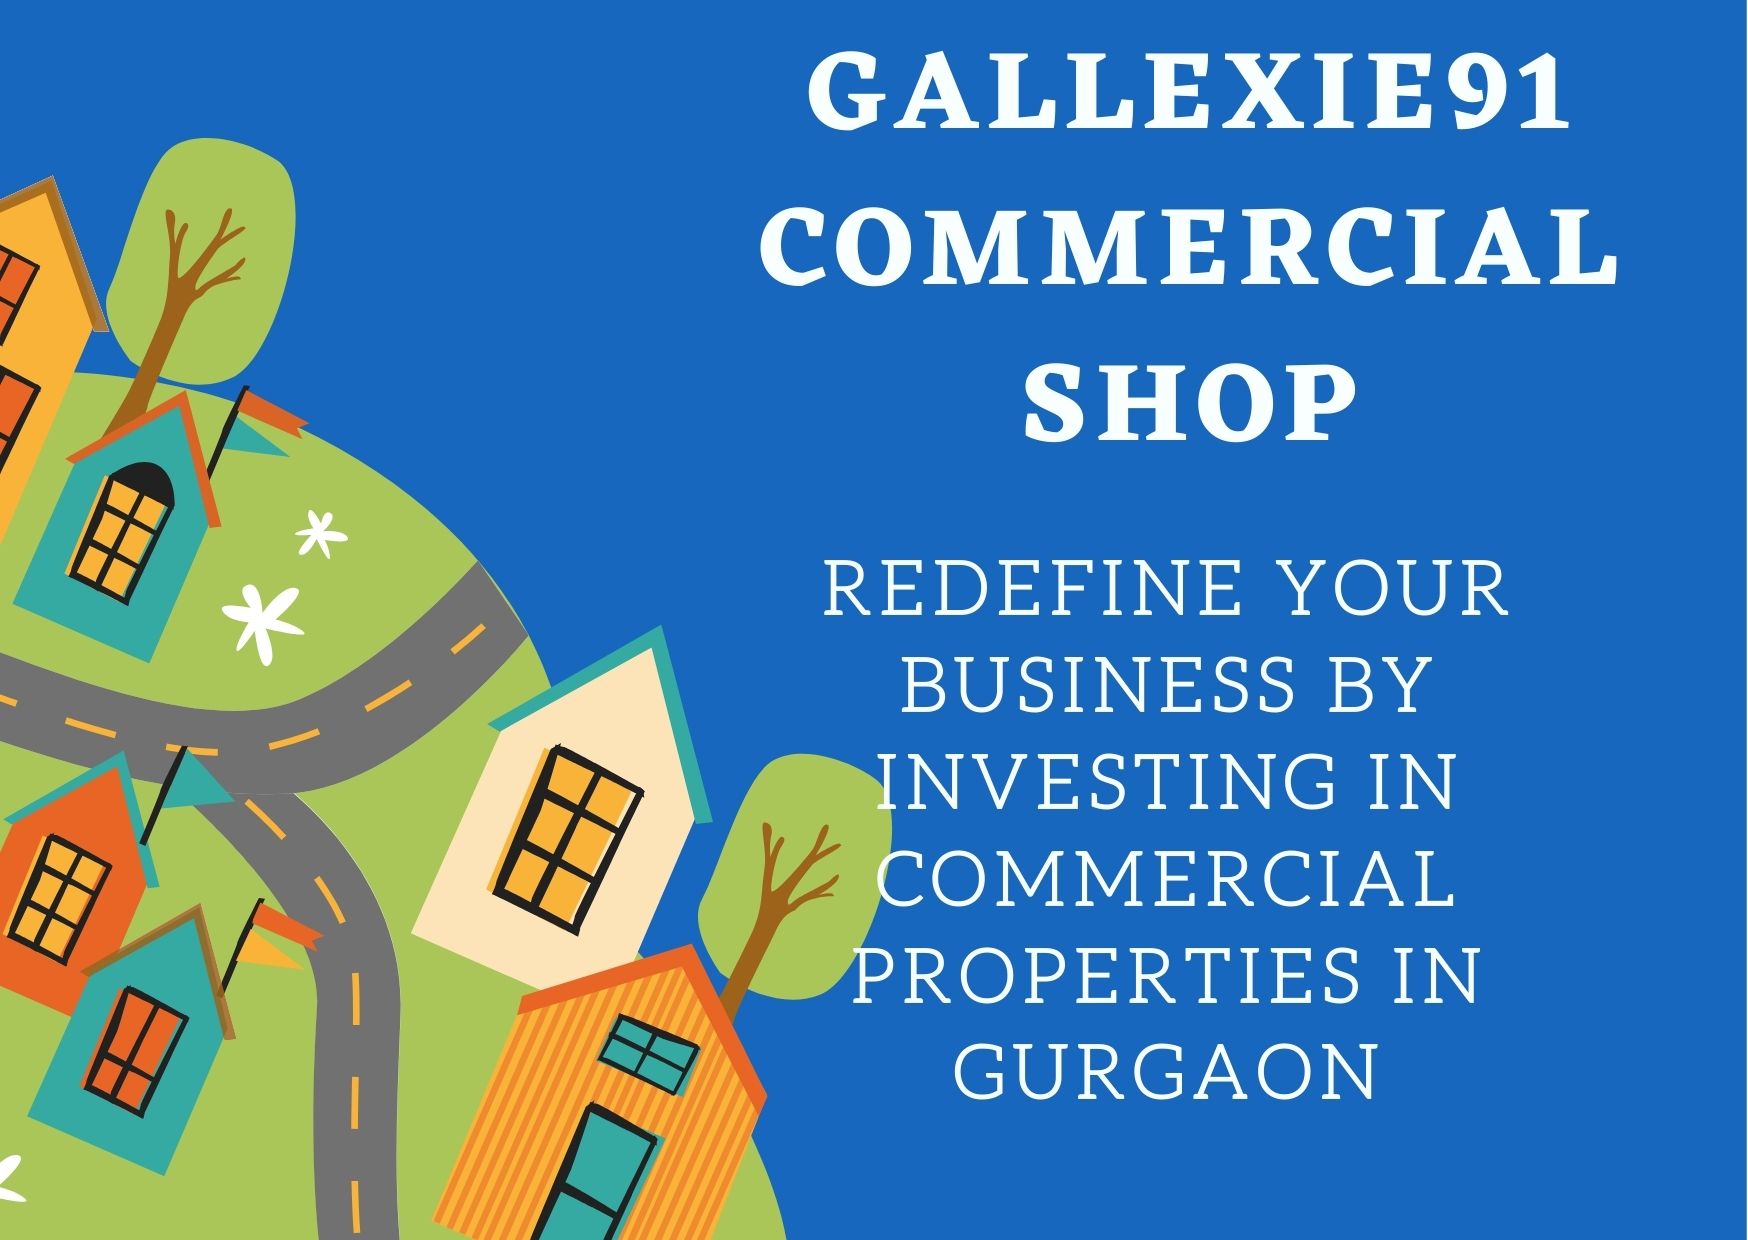 Redefine your business by investing in commercial properties in Gurgaon